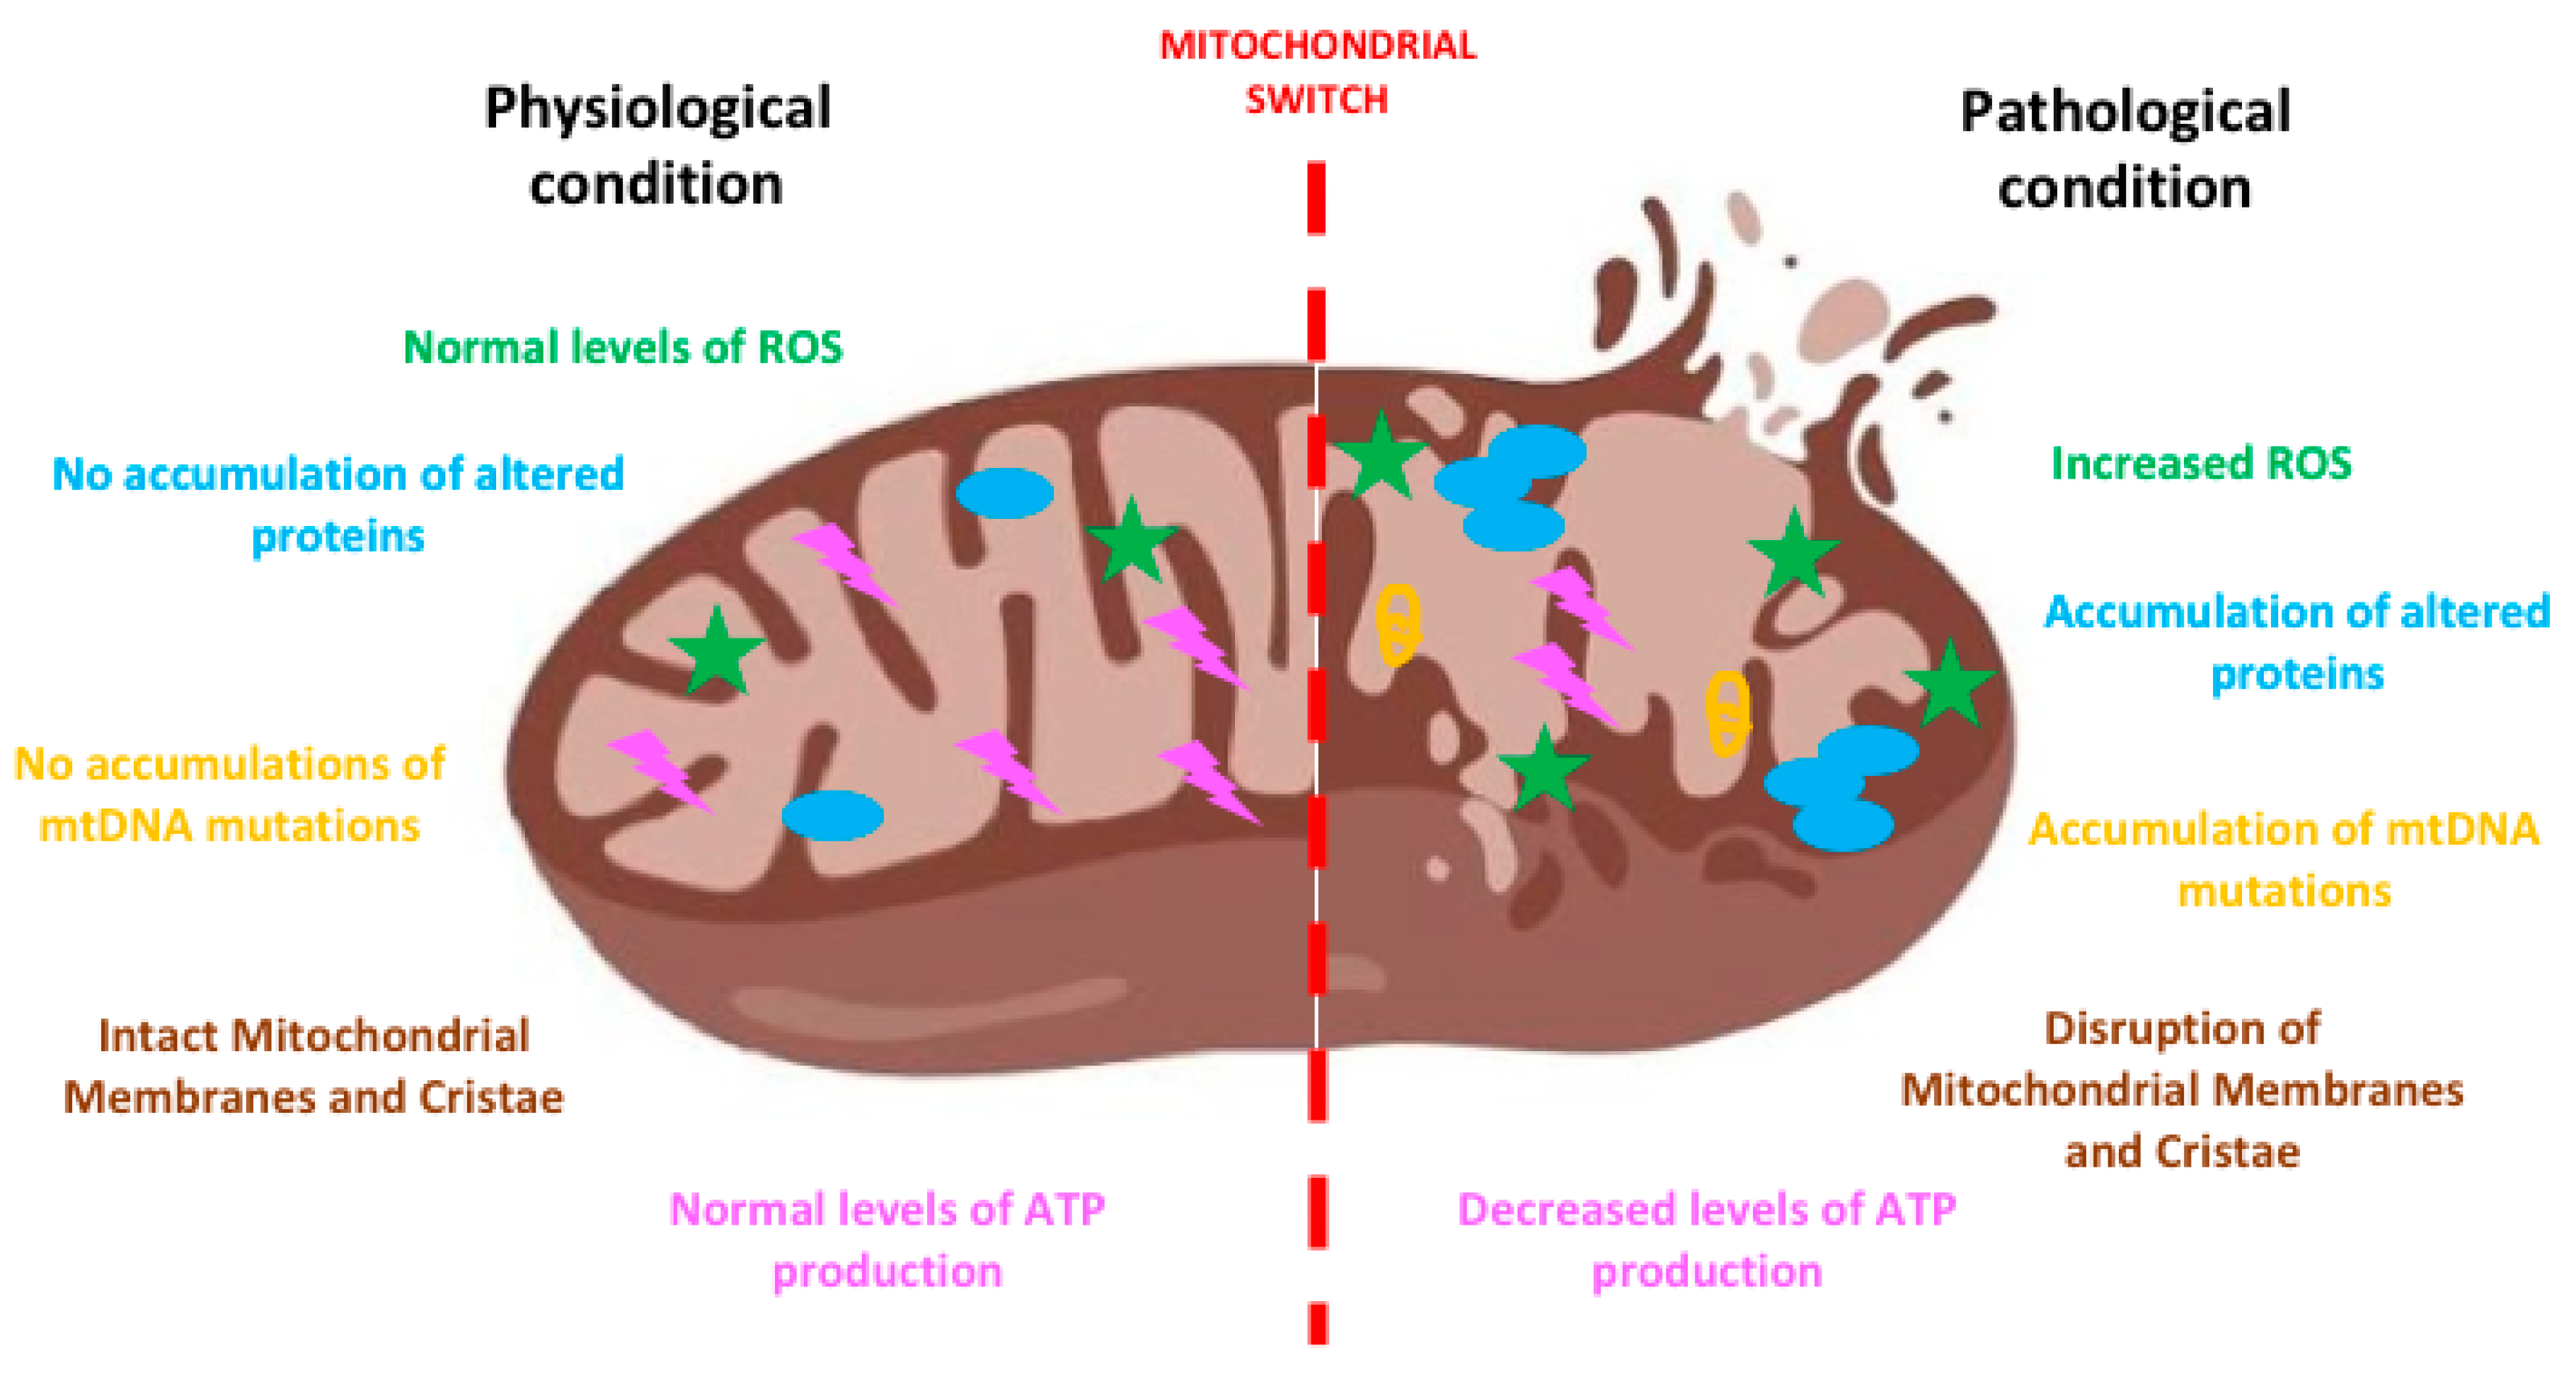 Mitochondrial Disorder